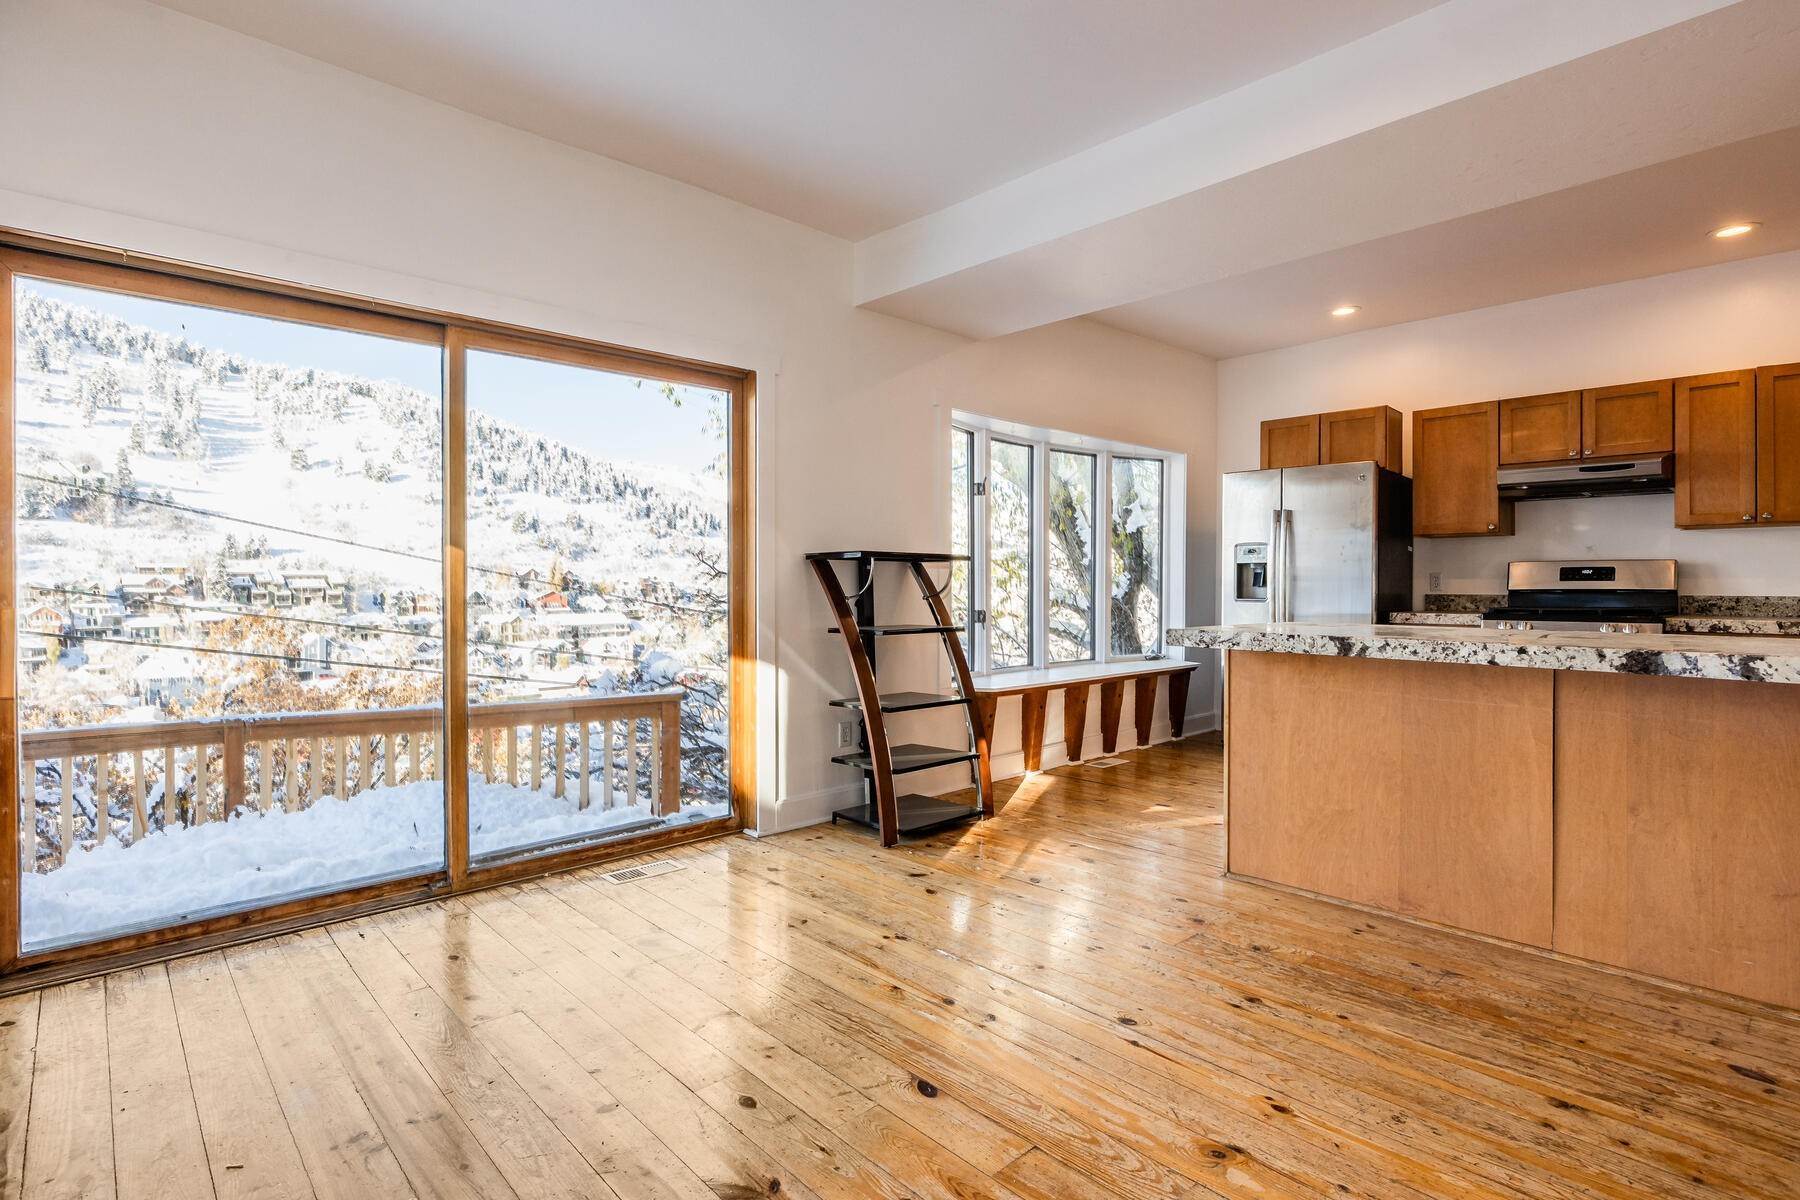 8. Duplex Homes for Sale at Old Town Duplex with Ski Resort Views 410 Ontario Avenue Park City, Utah 84060 United States